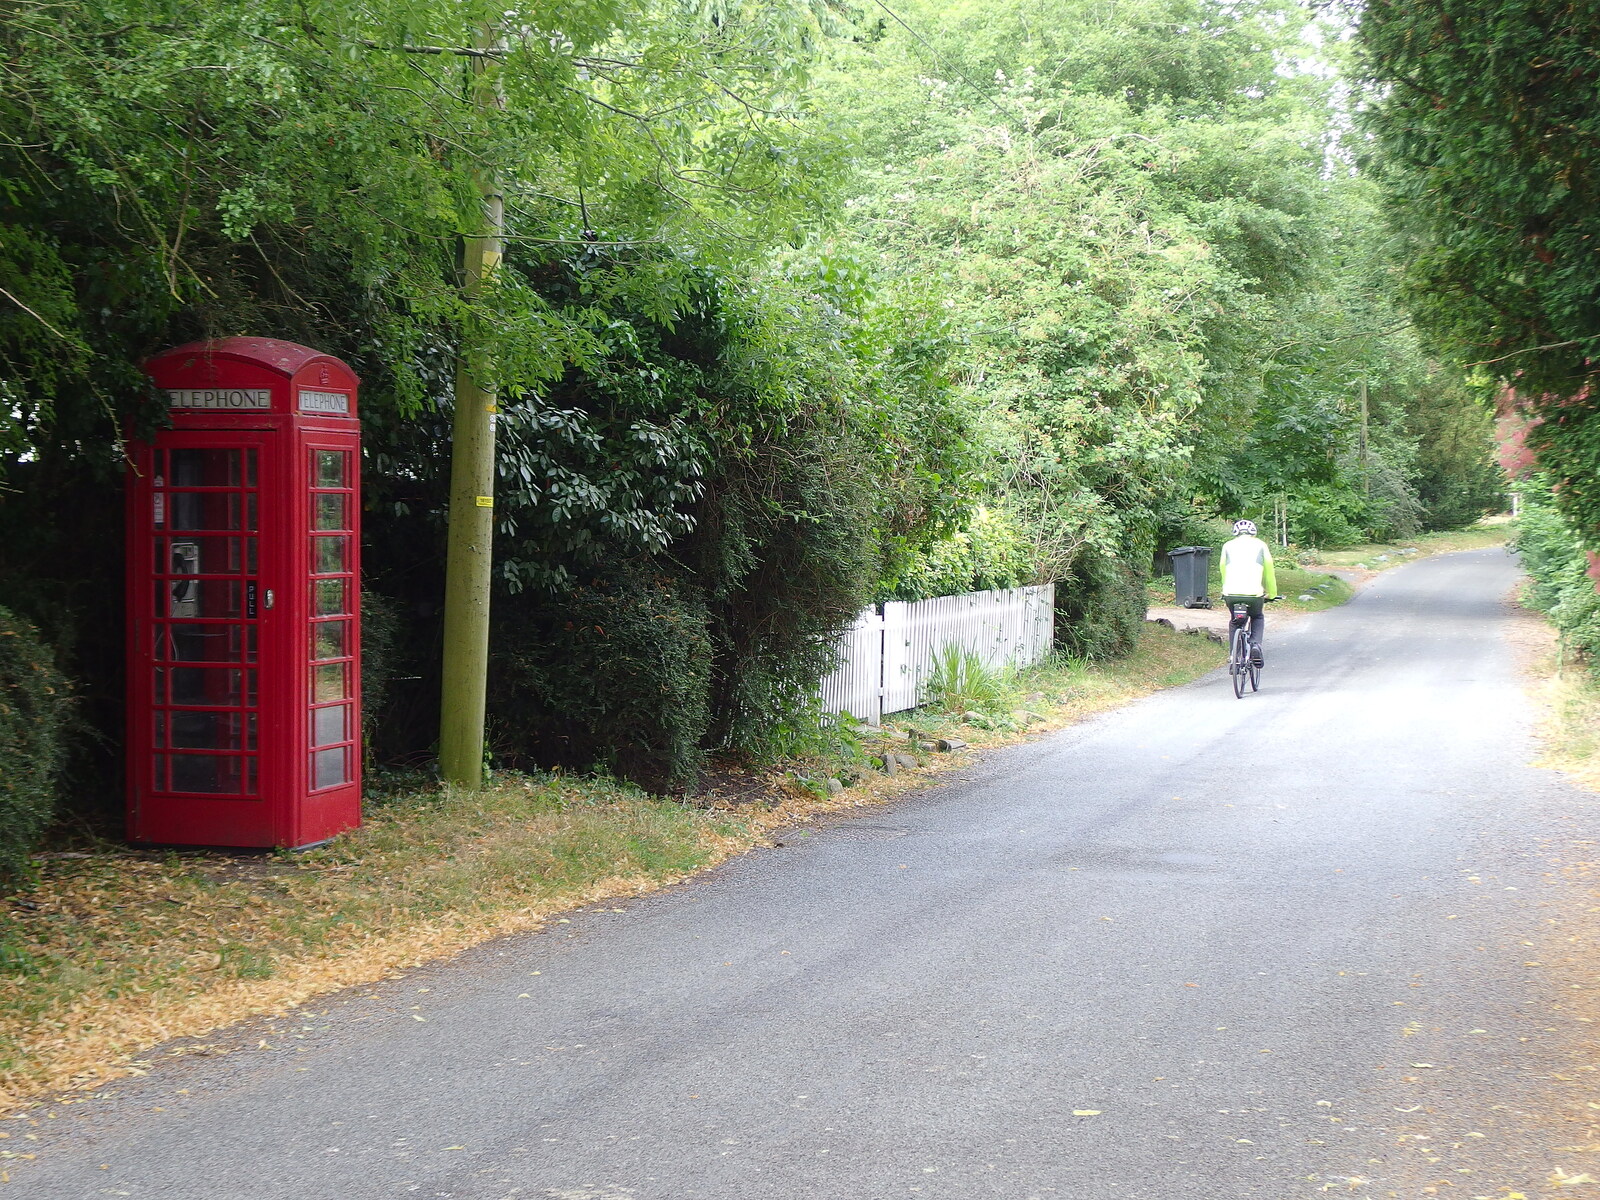 Westhorpe has a K6 phonebox with an actual phone from A Ride to Walsham Le Willows, Suffolk - 15th July 2022